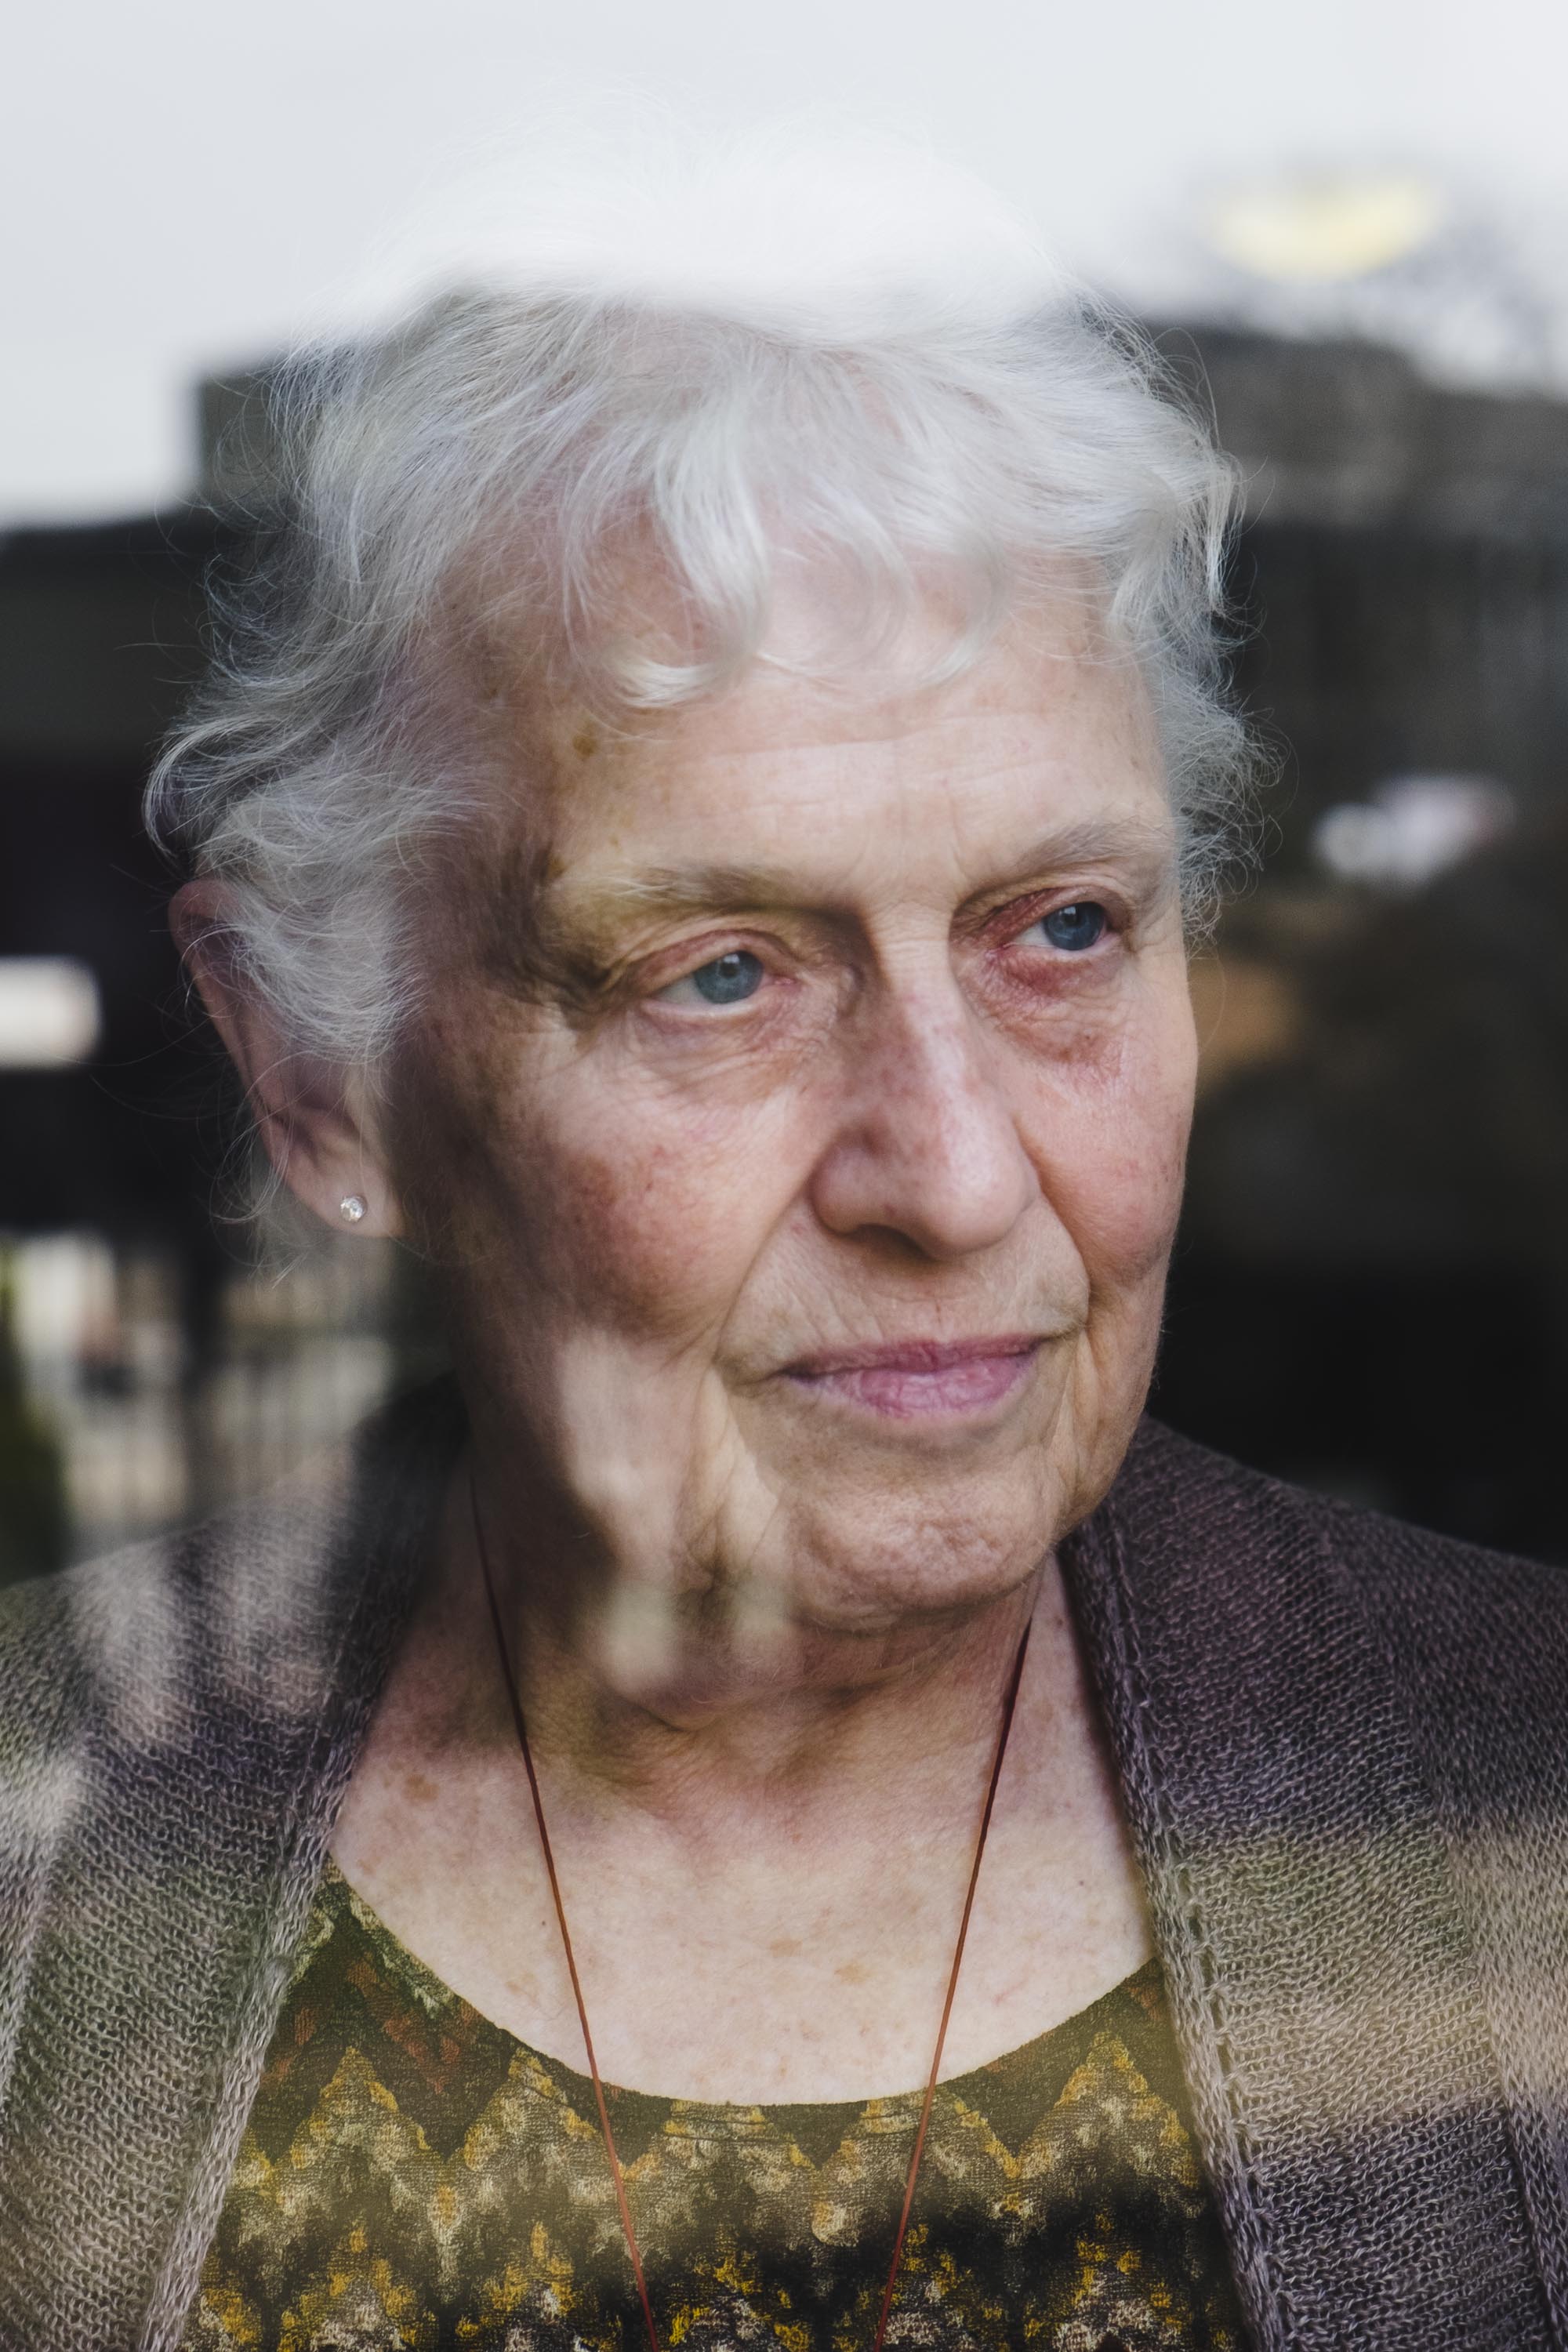  Susan Alitto, one of the founding members of the Chicago Hyde Park Village, an organization that aims to keep older adults involved in the community and battle loneliness. 